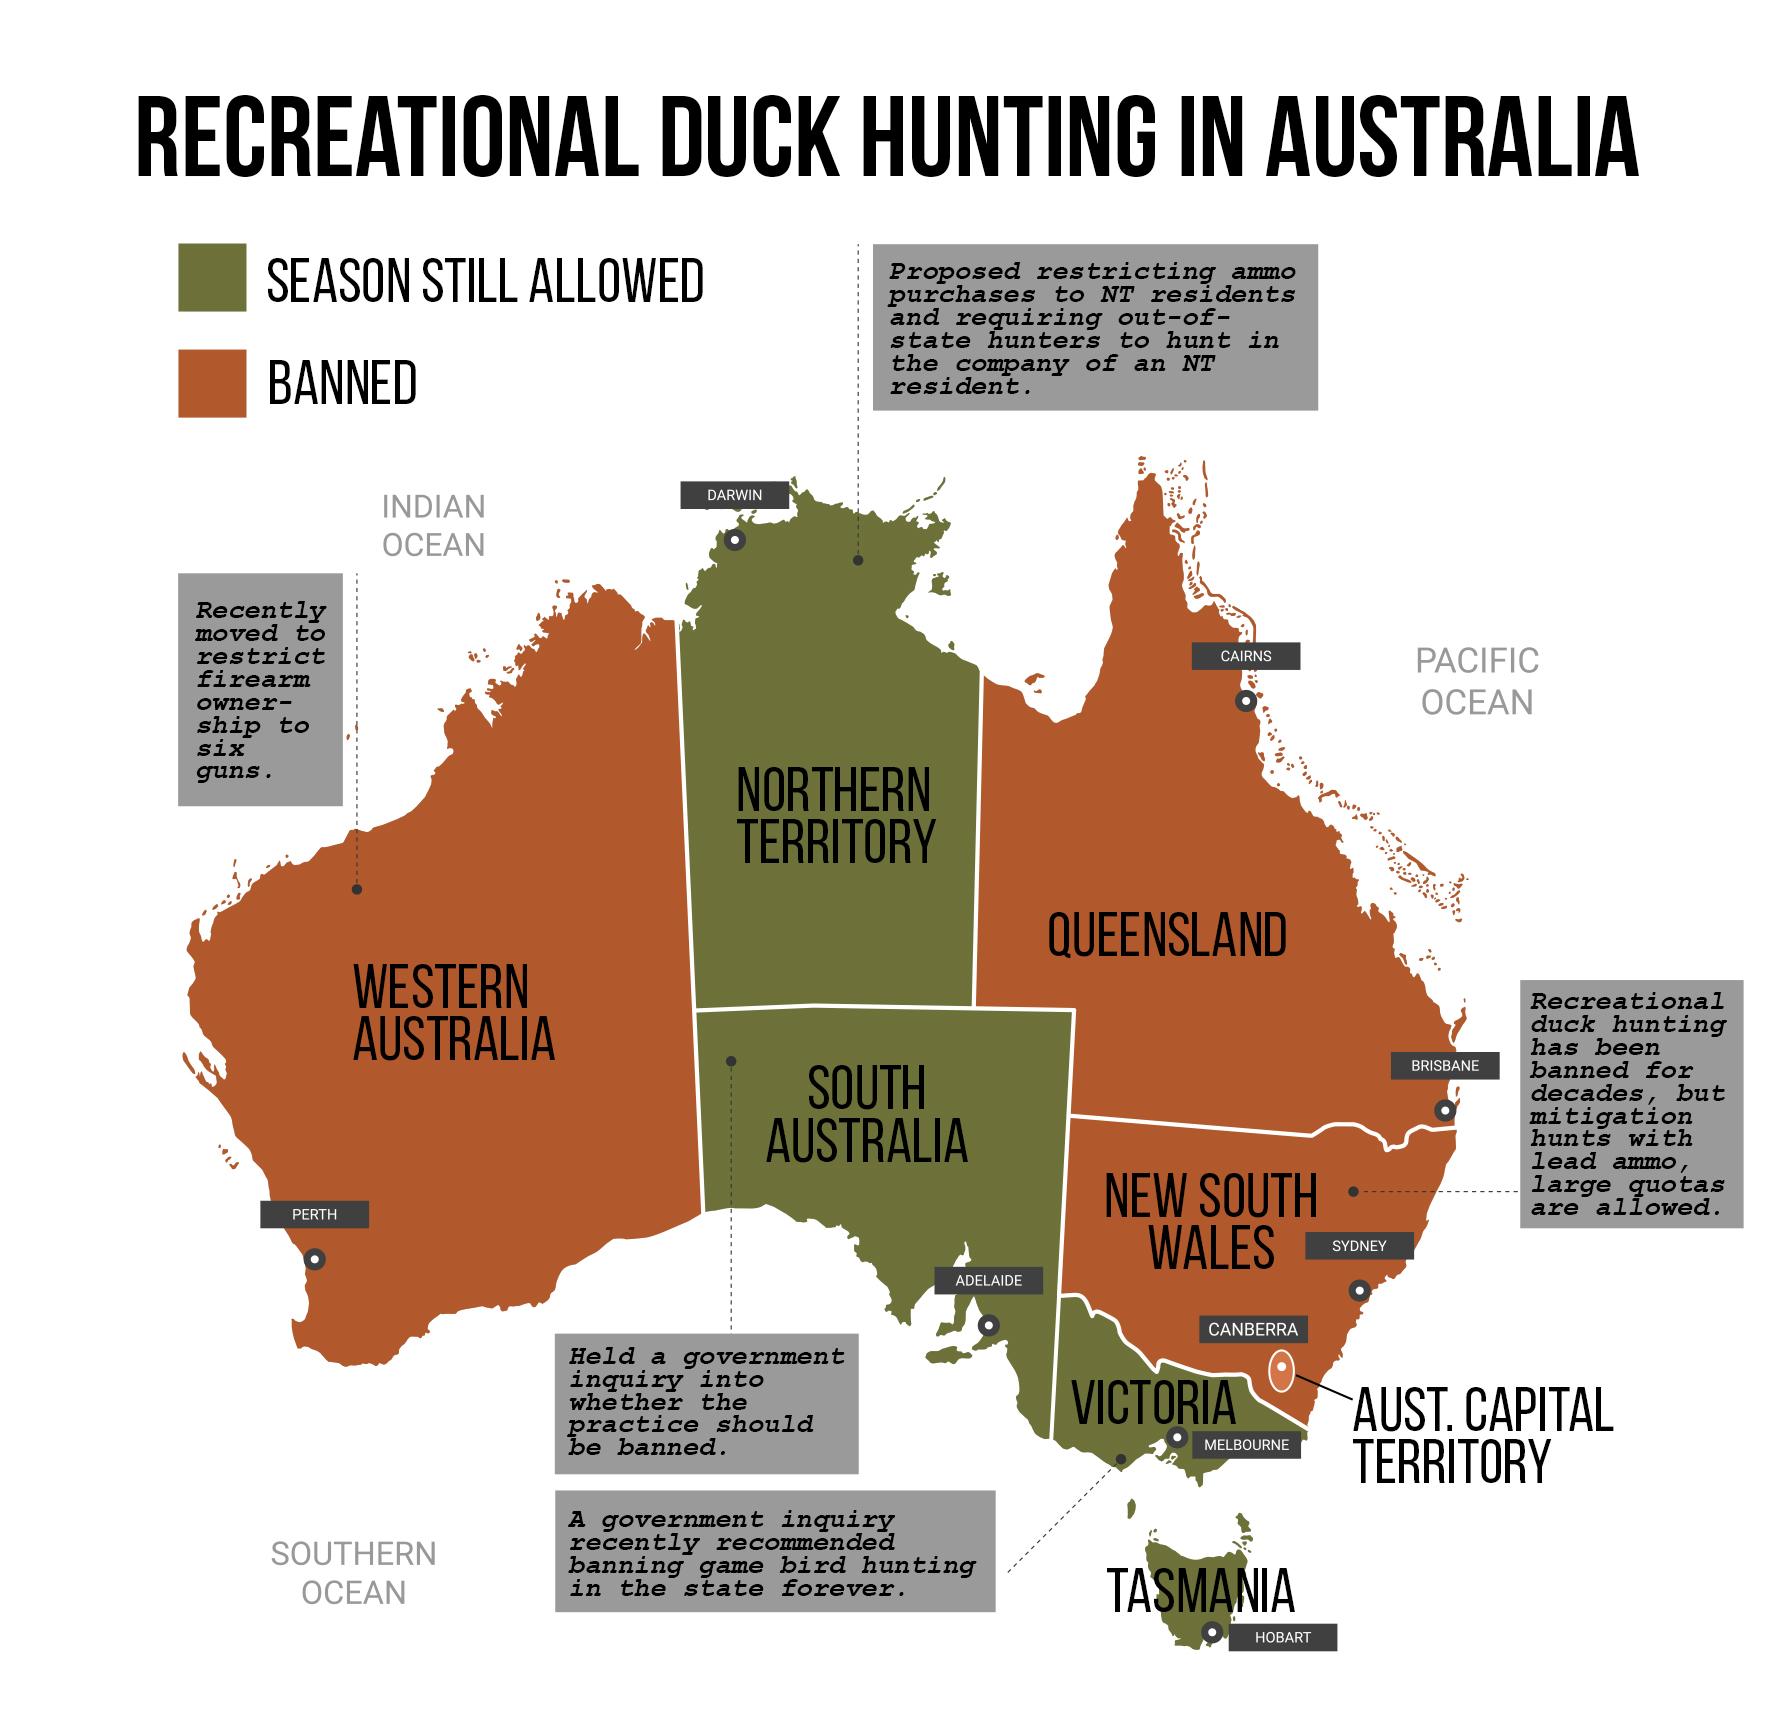 A map of Australia's states and territories showing where duck hunting is banned.